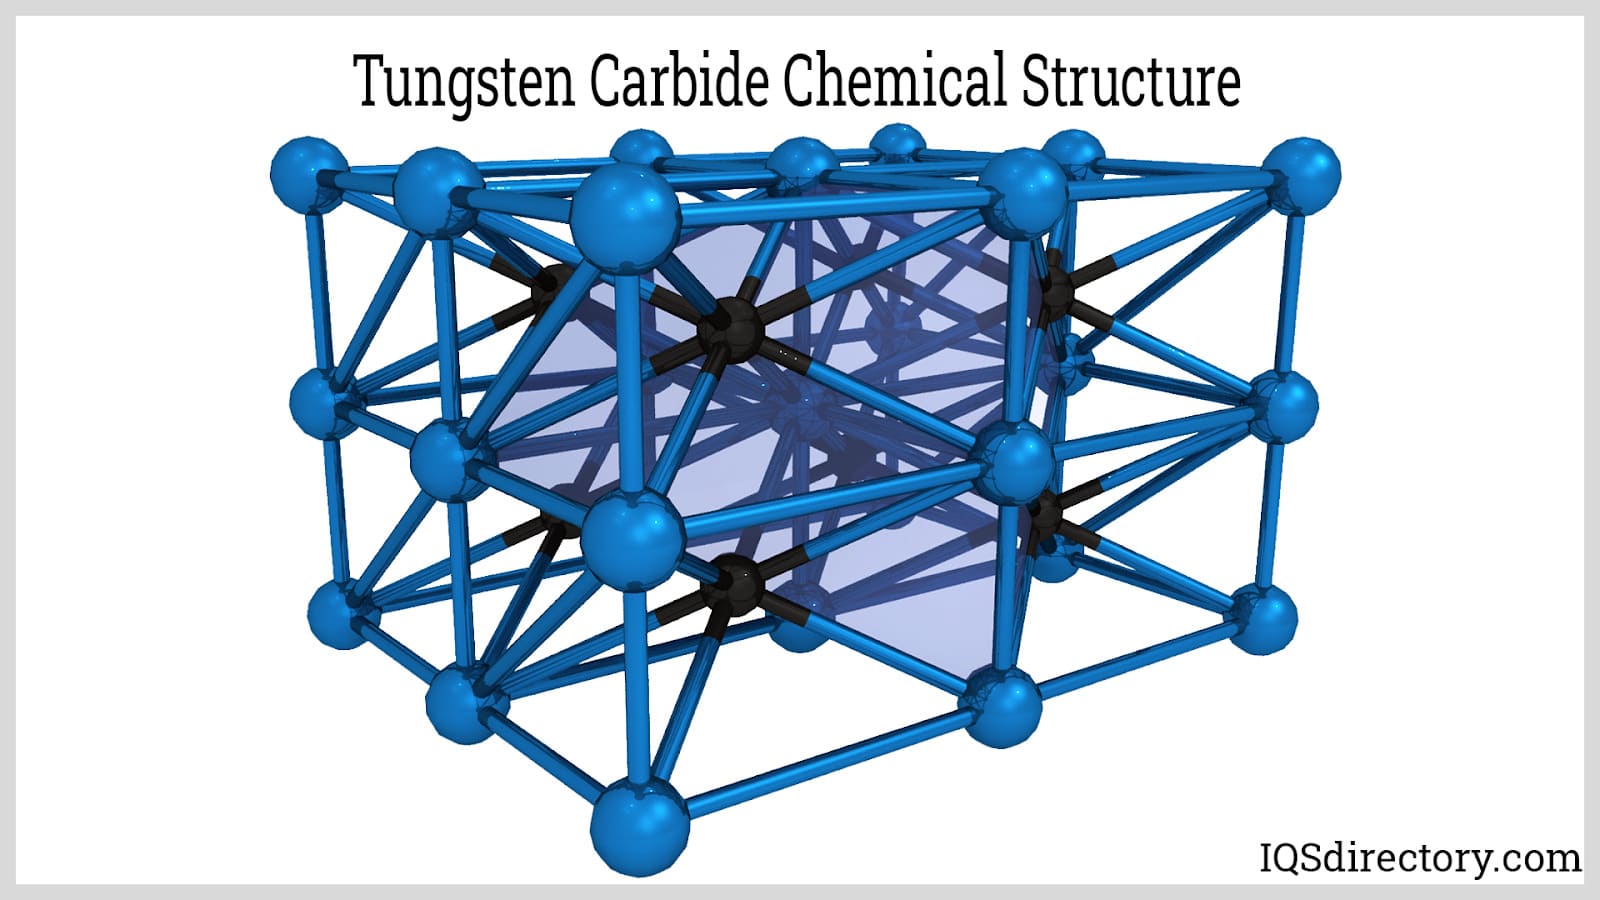 Tungsten Carbide Chemical Structure